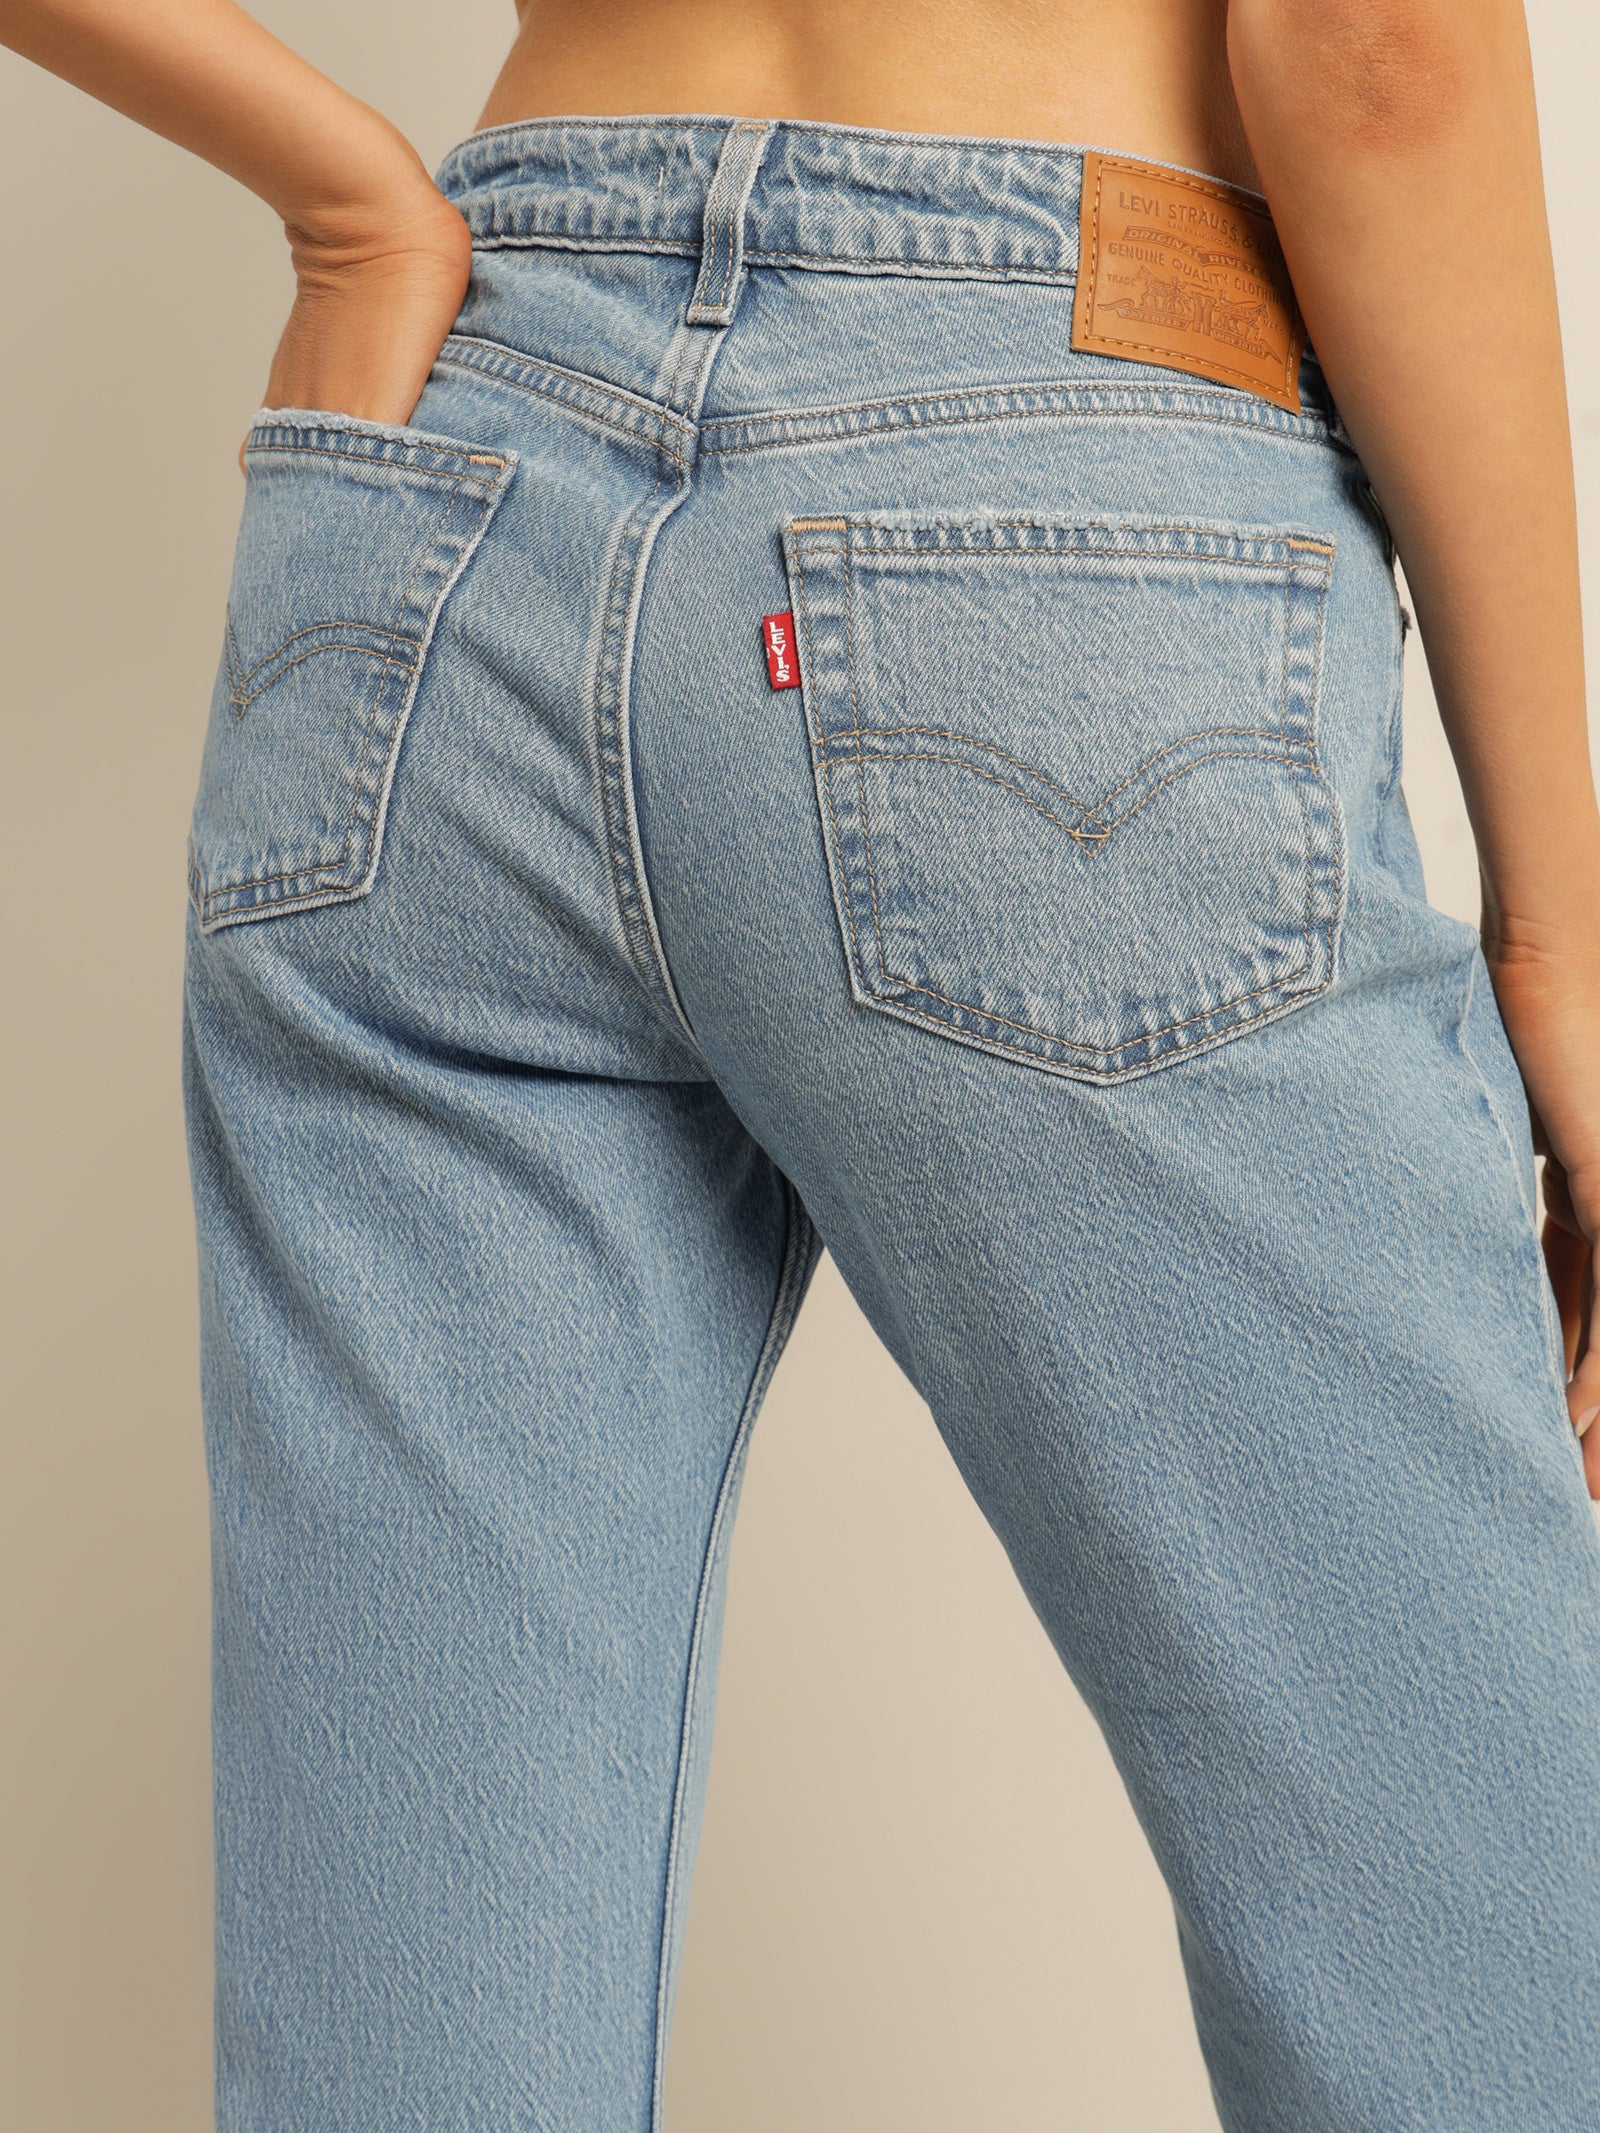 Ribcage Straight Ankle Jeans in Jazz Wave - Glue Store NZ